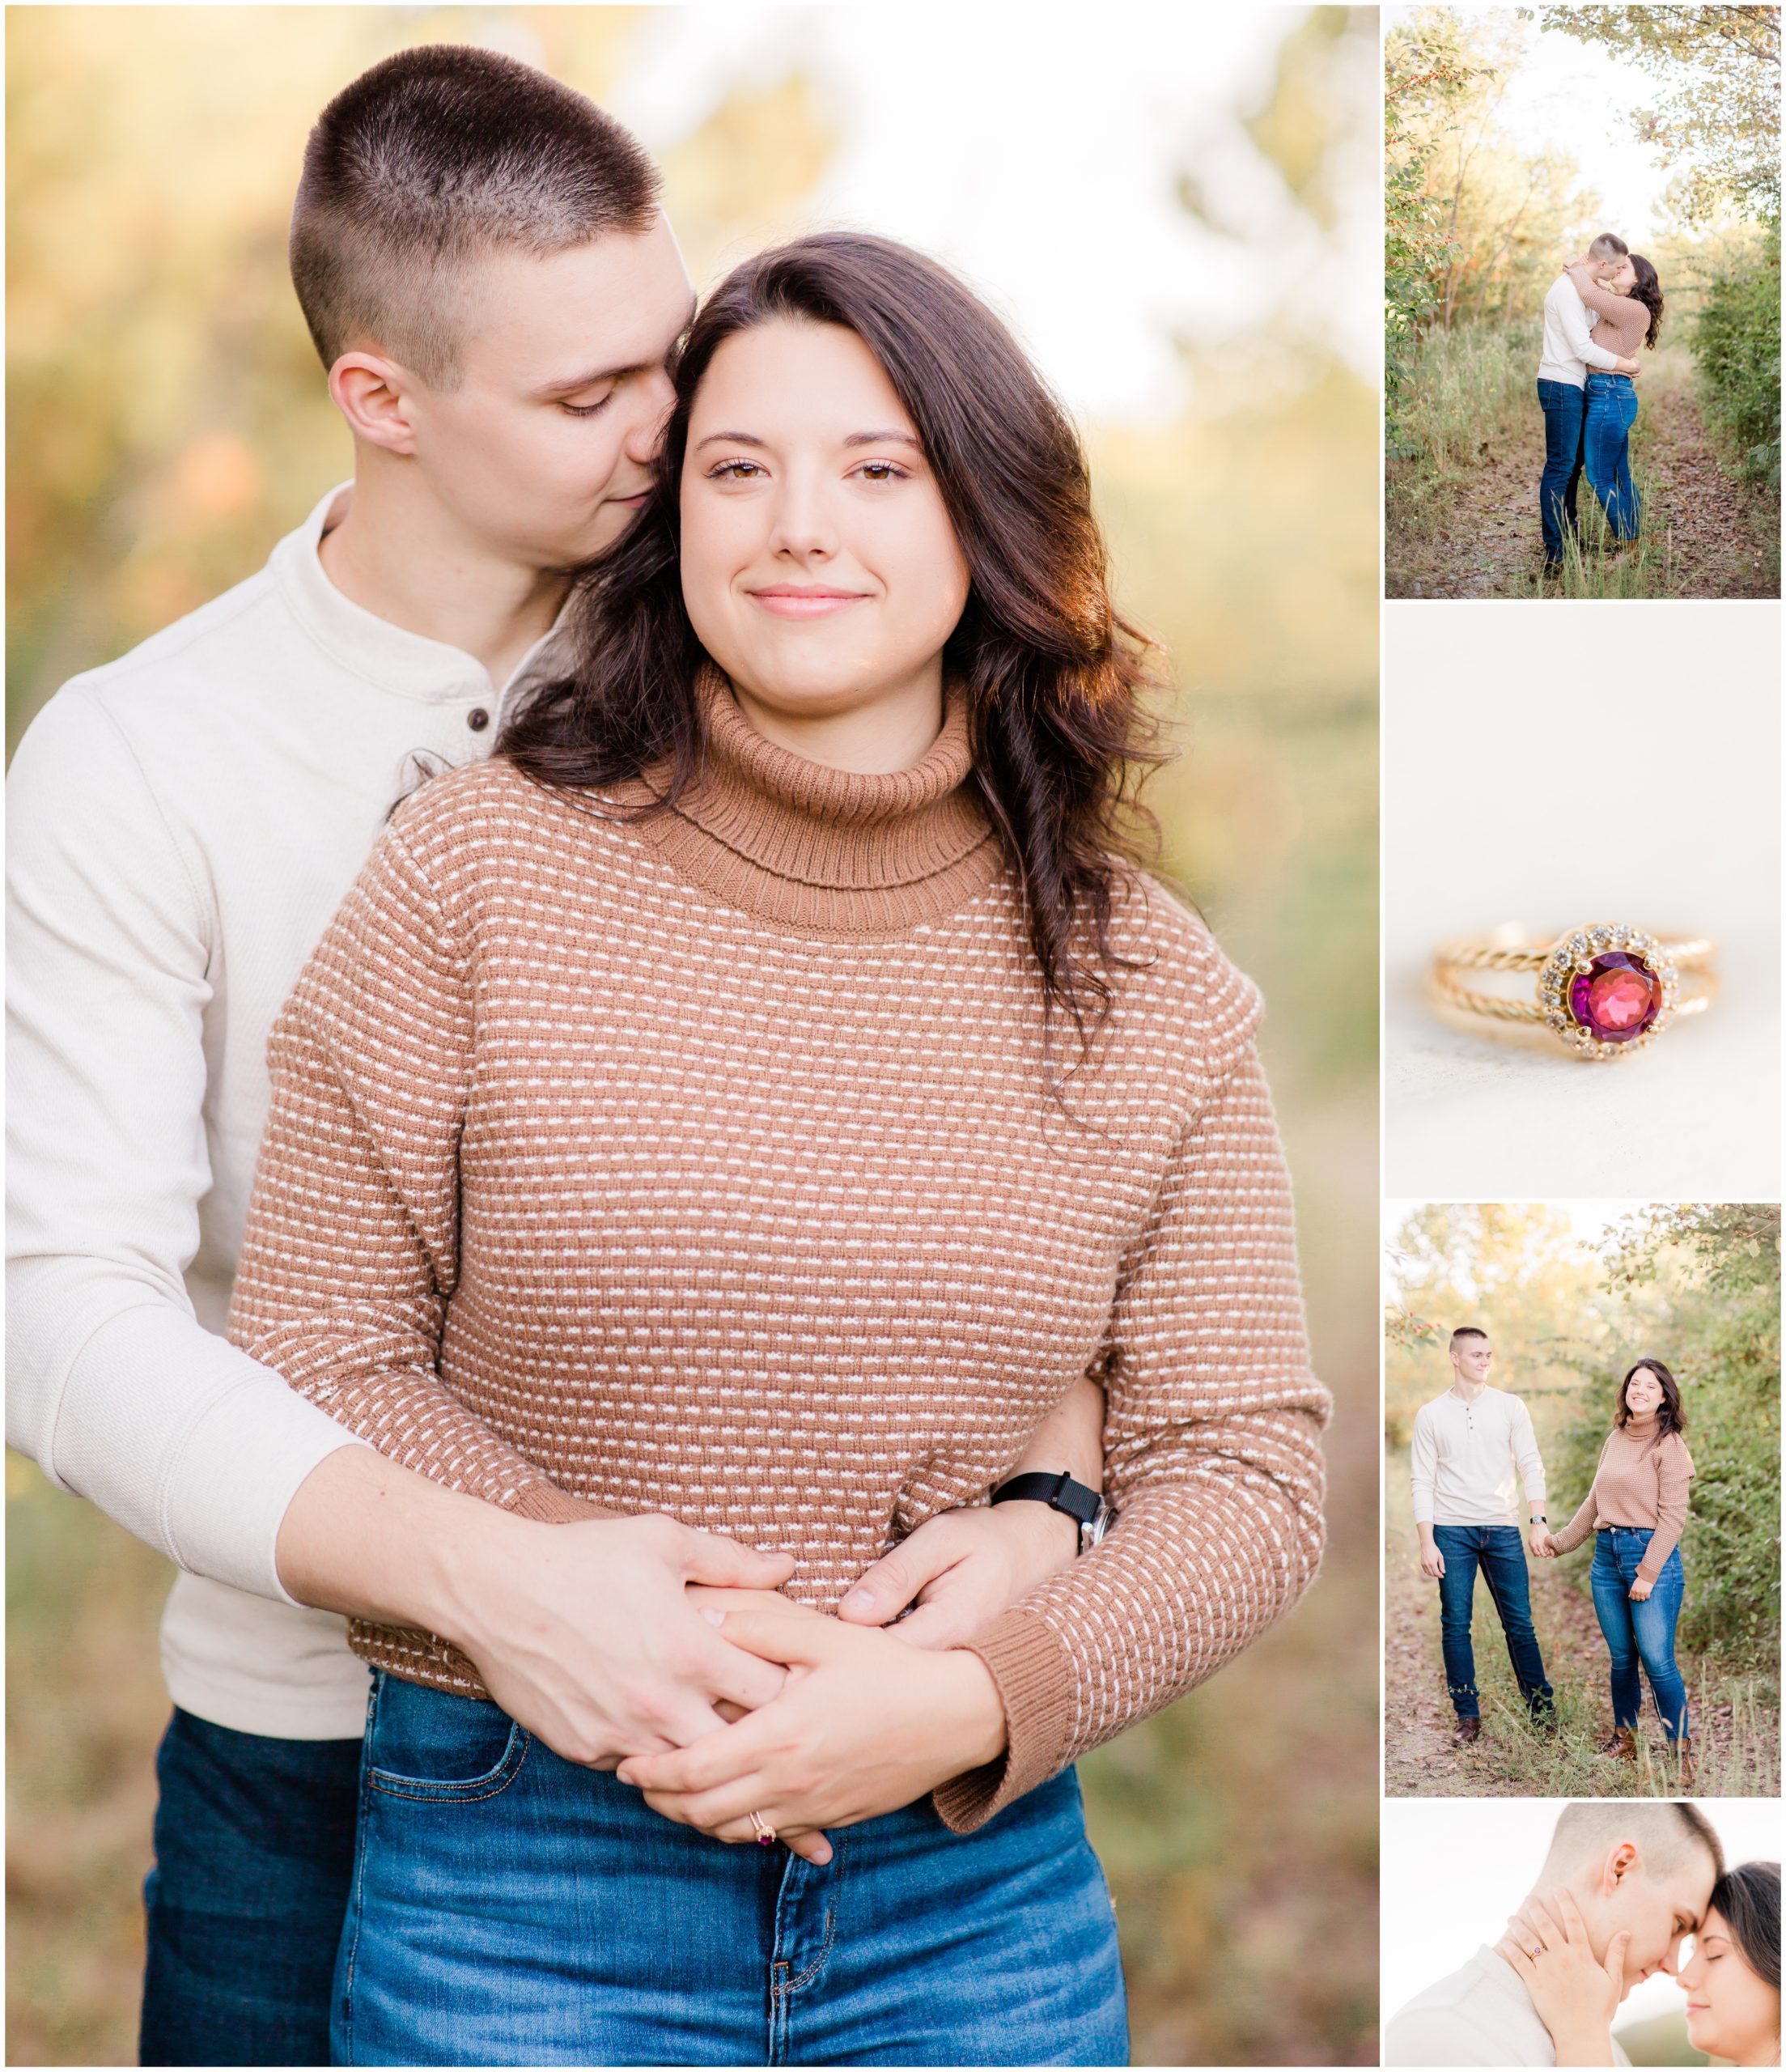 Engagement Session with Lookout Mountain Views with alyssa rachelle photography